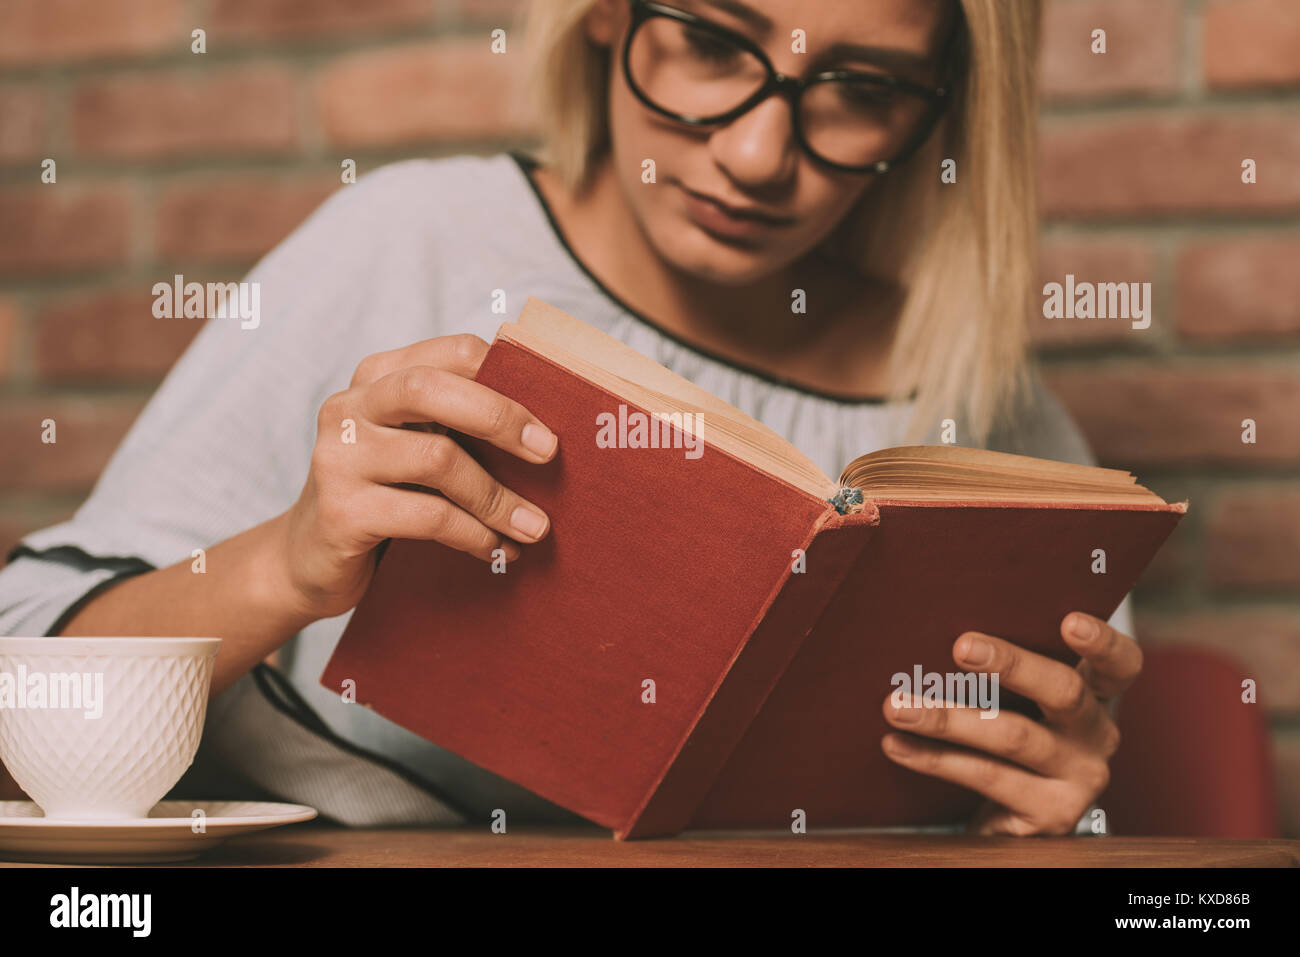 Woman sitting at a table reading a book Stock Photo